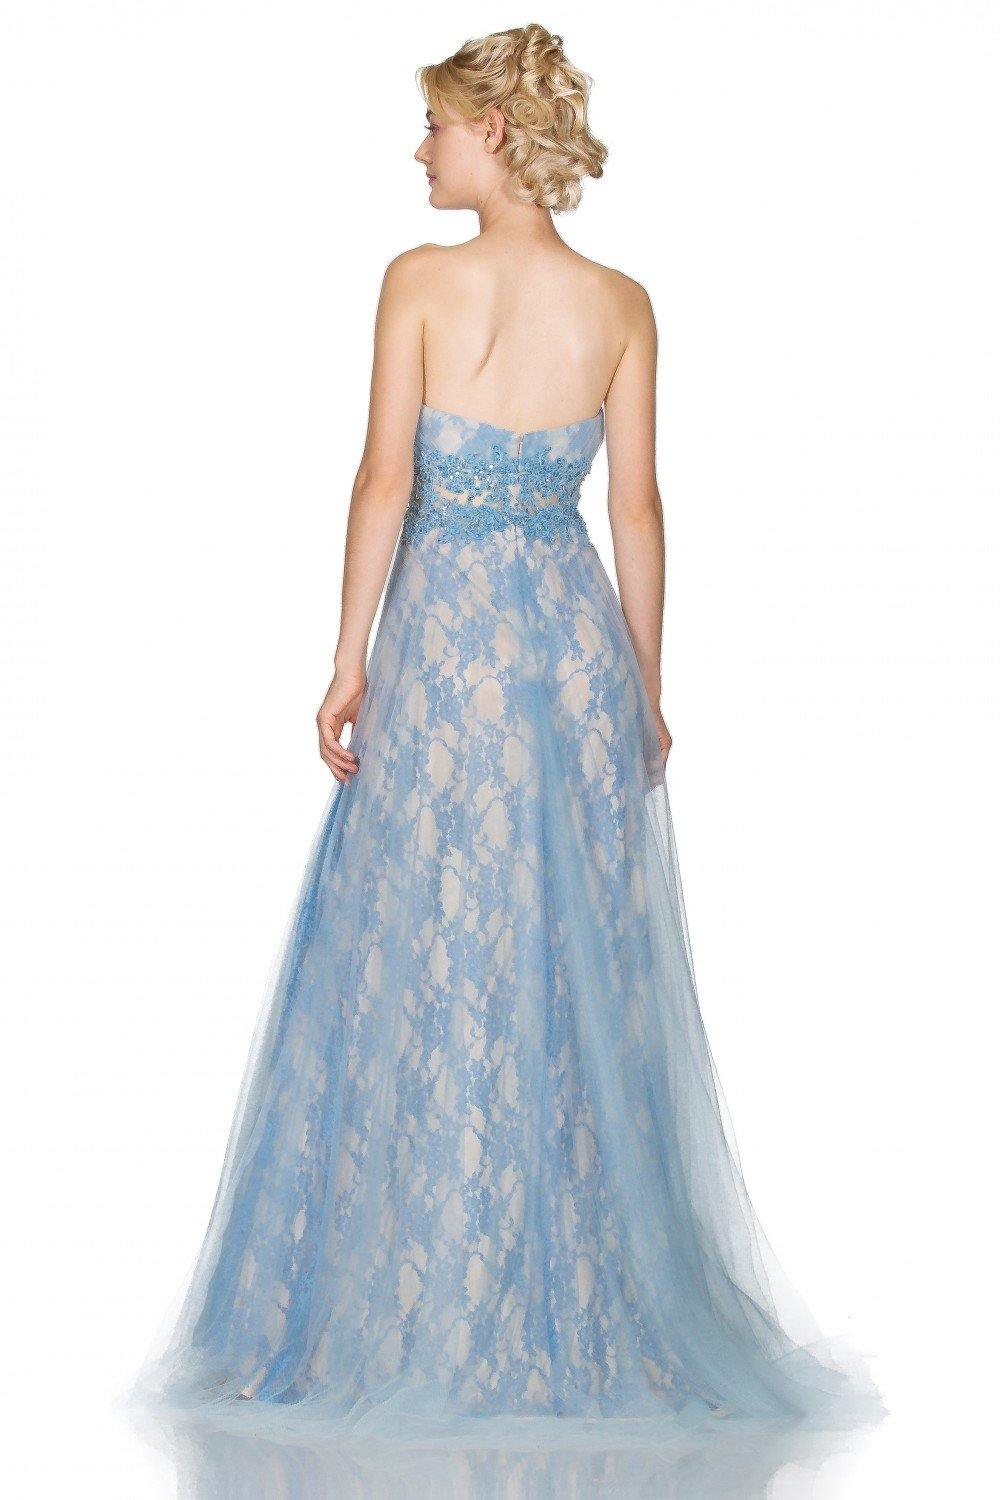 Prom Long Lace Dress - The Dress Outlet